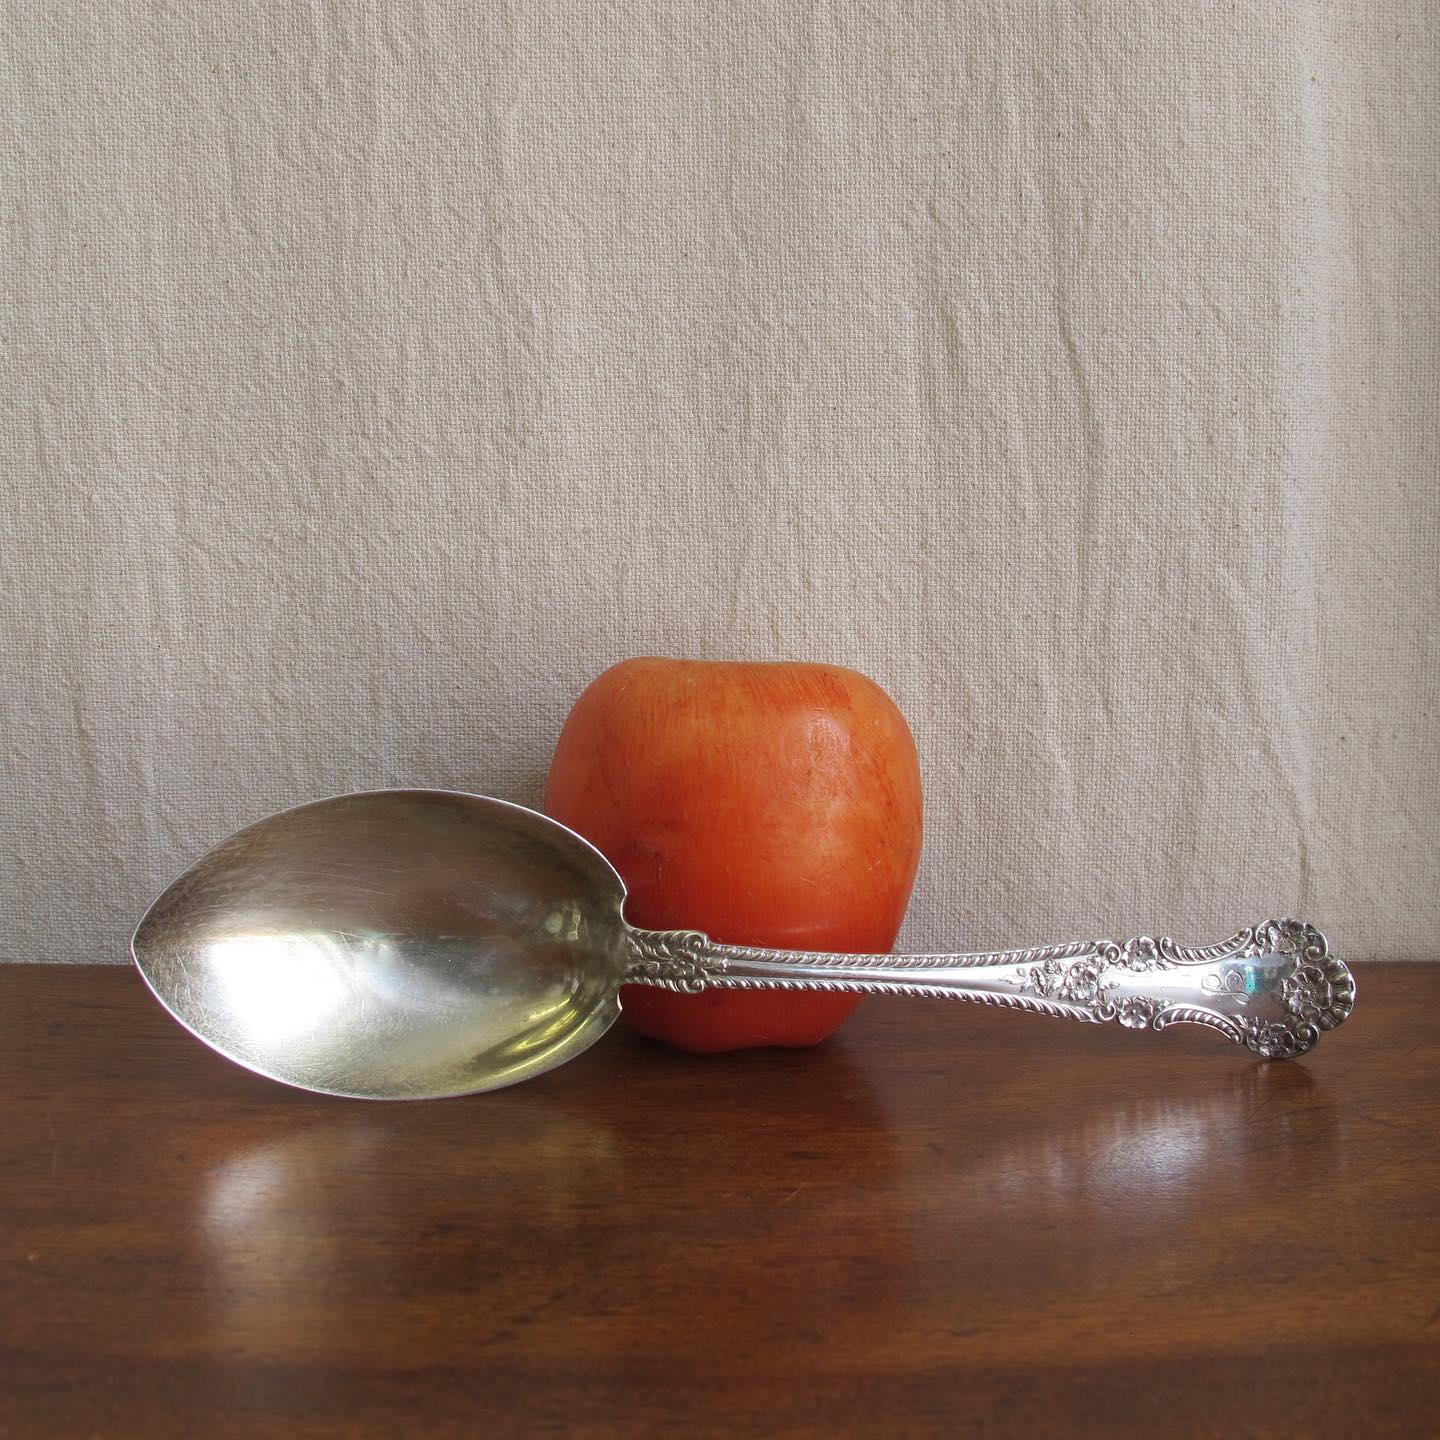 Large Victorian Gorham sterling silver ‘Cambridge’ salad or serving spoon, lobed bowl with remnants of a gold wash, dated 1899